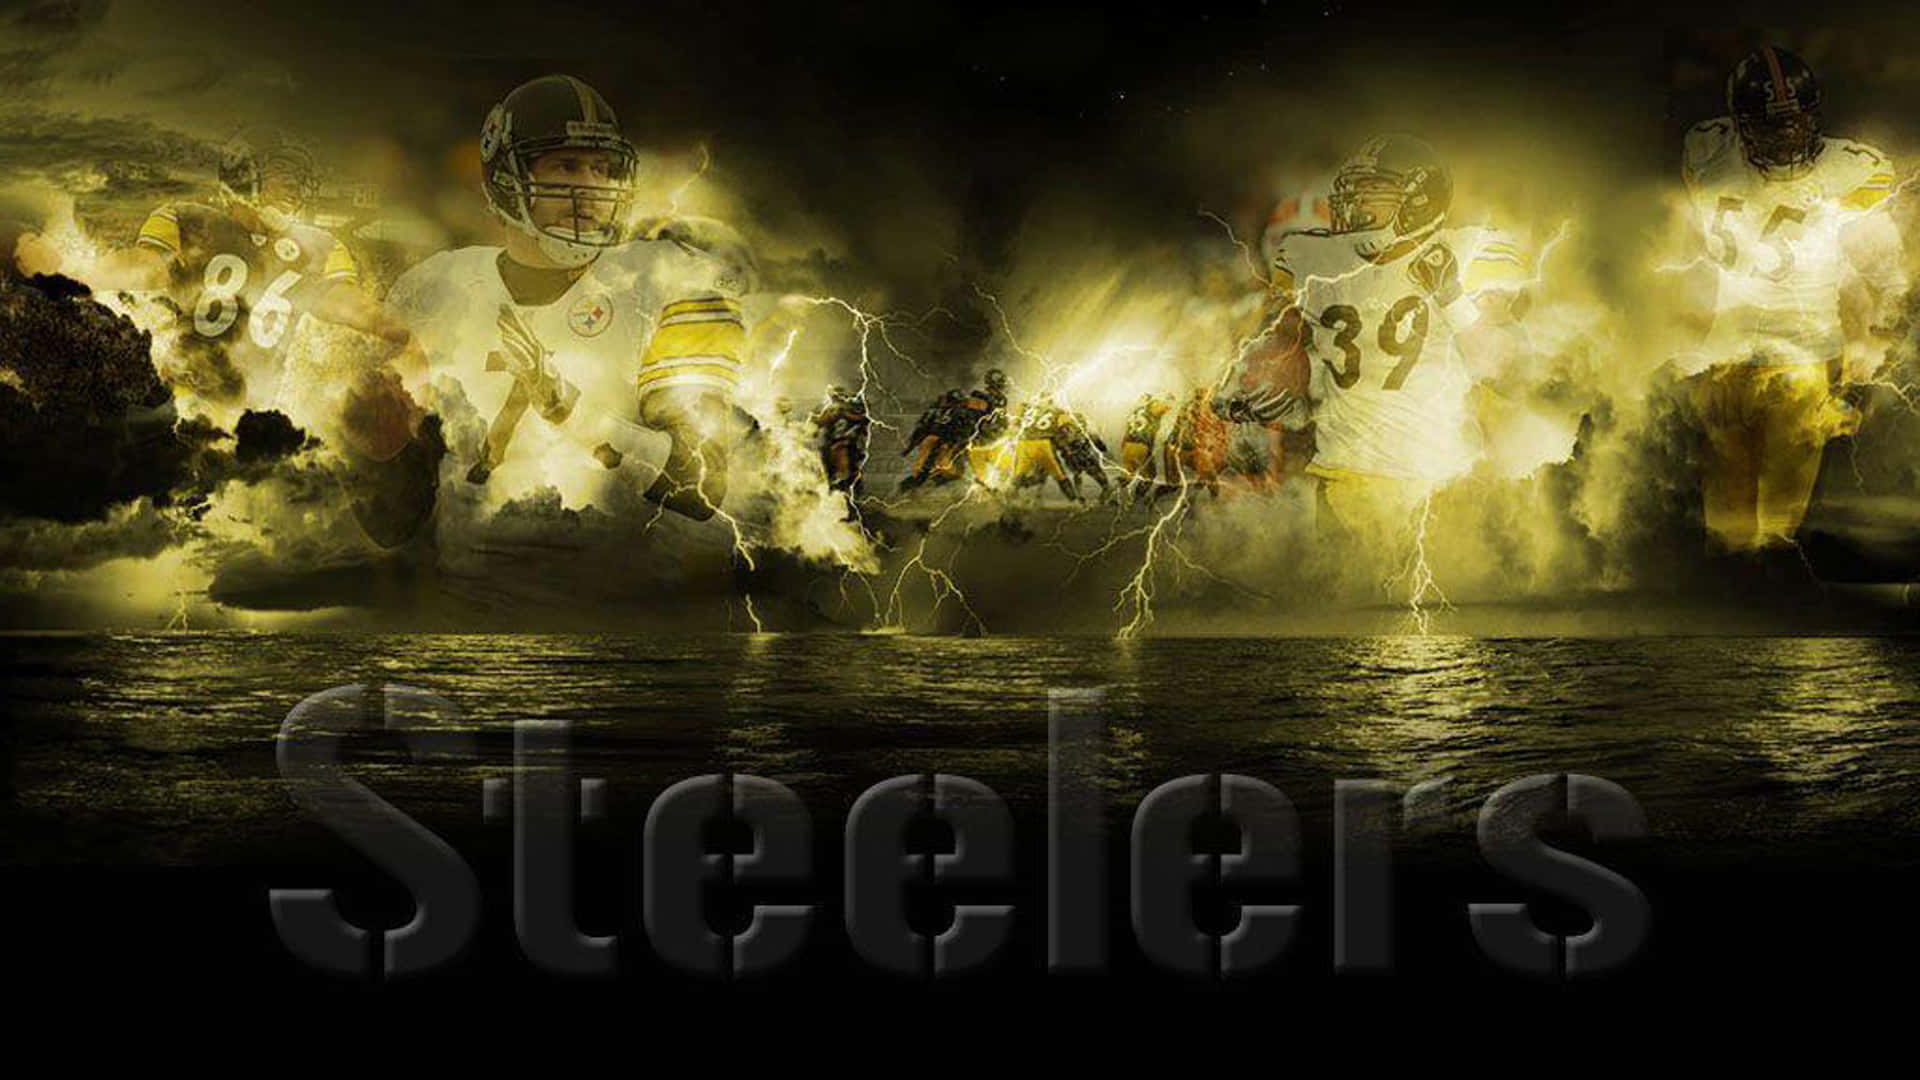 Pittsburgh Steelers Text Logo And Players Wallpaper